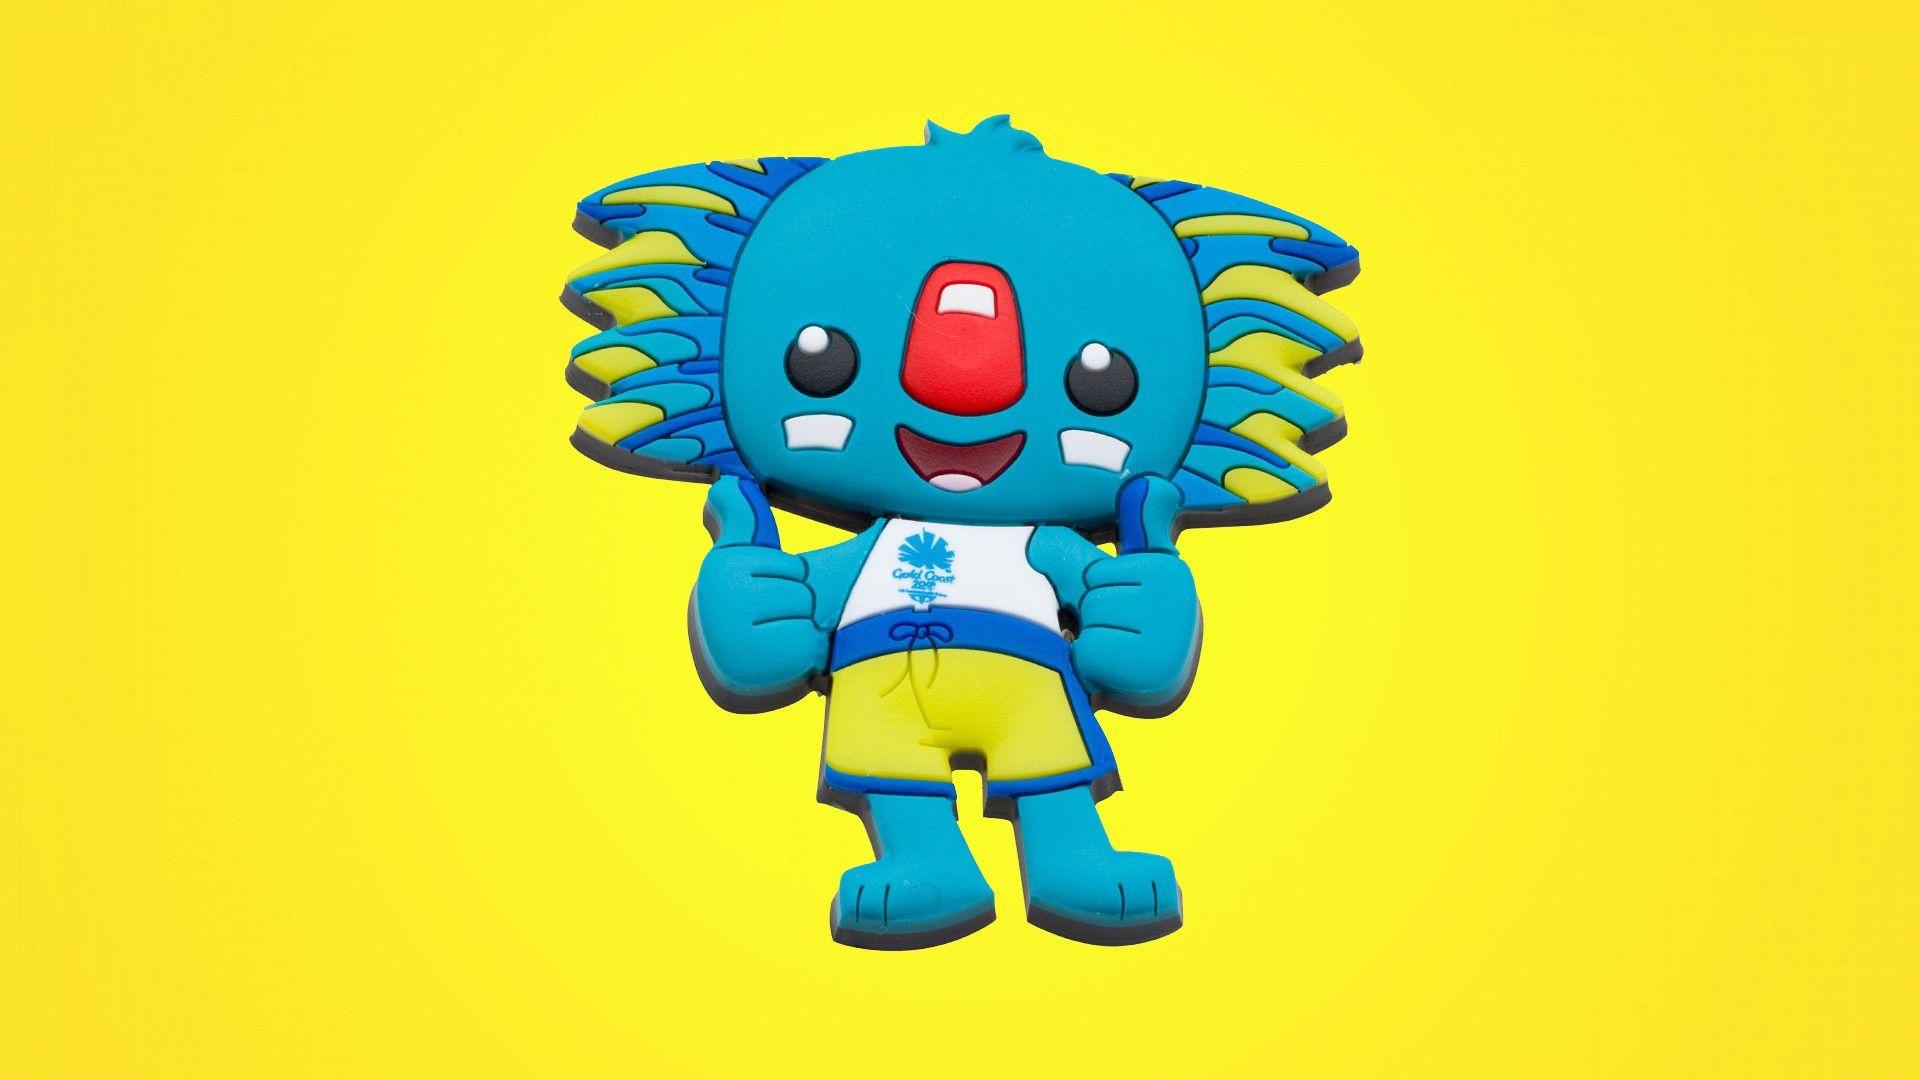 Commonwealth Games Mascot Background HD Wallpaper 34371